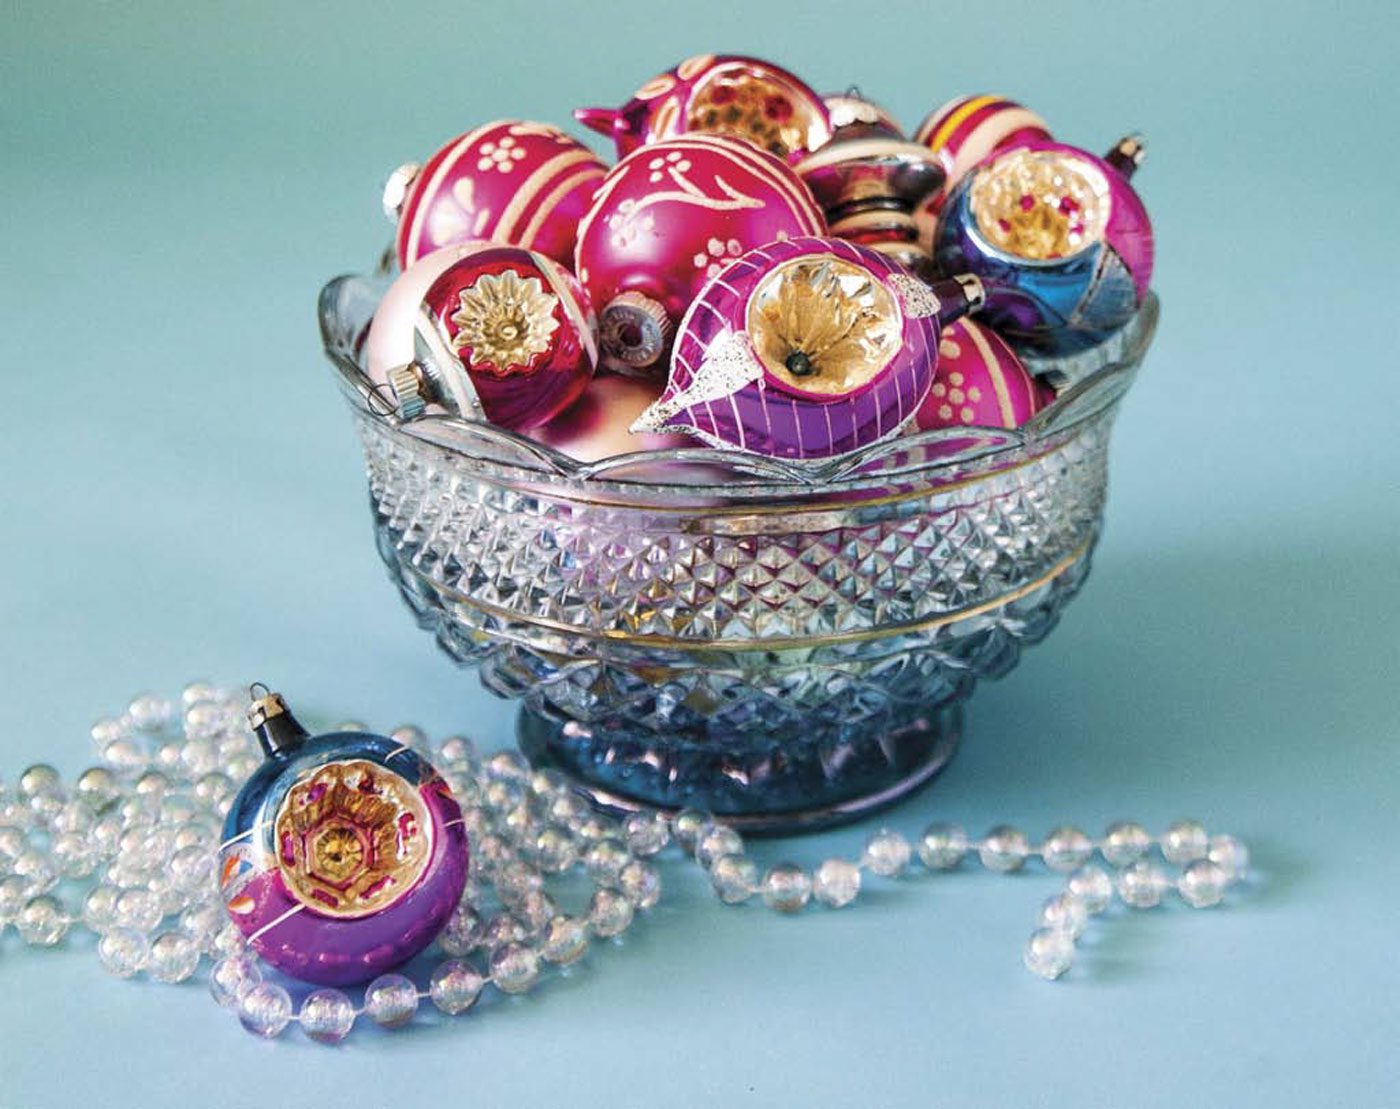 A beautiful clear glass bowl is full of colorful collectible glass ornaments.